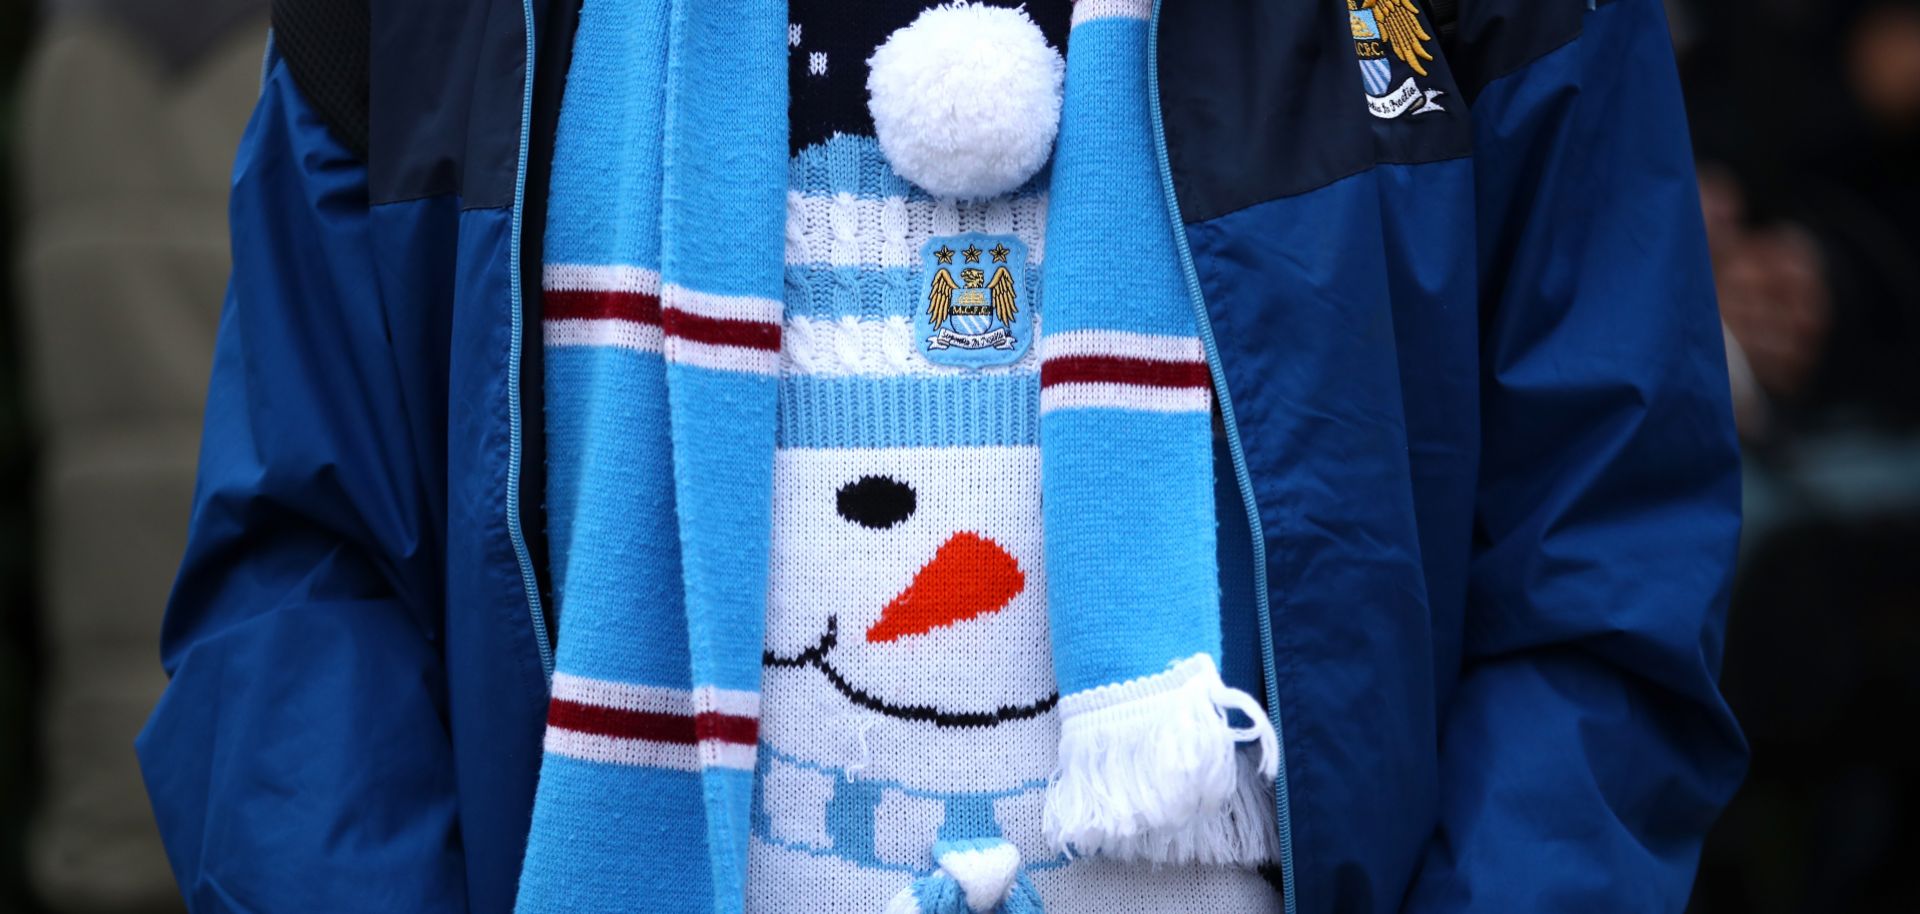 A fan of the Manchester City squad of the English Premier League shows off his festive spirit before a home match in December.